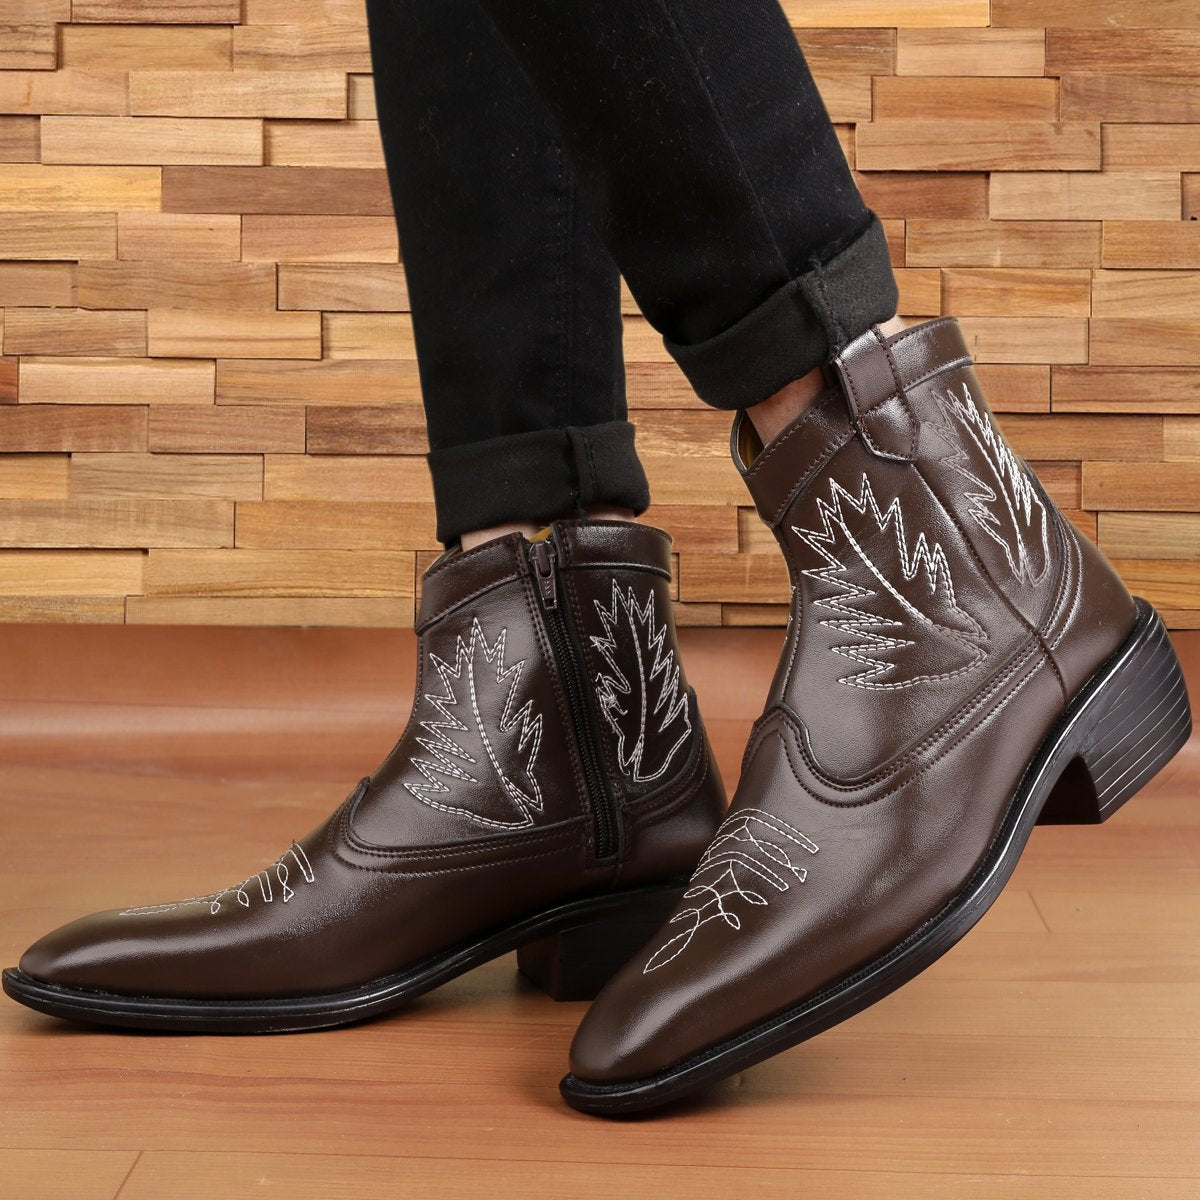 Jack Marc New Men's Formal and Casual Retro Brown Boots